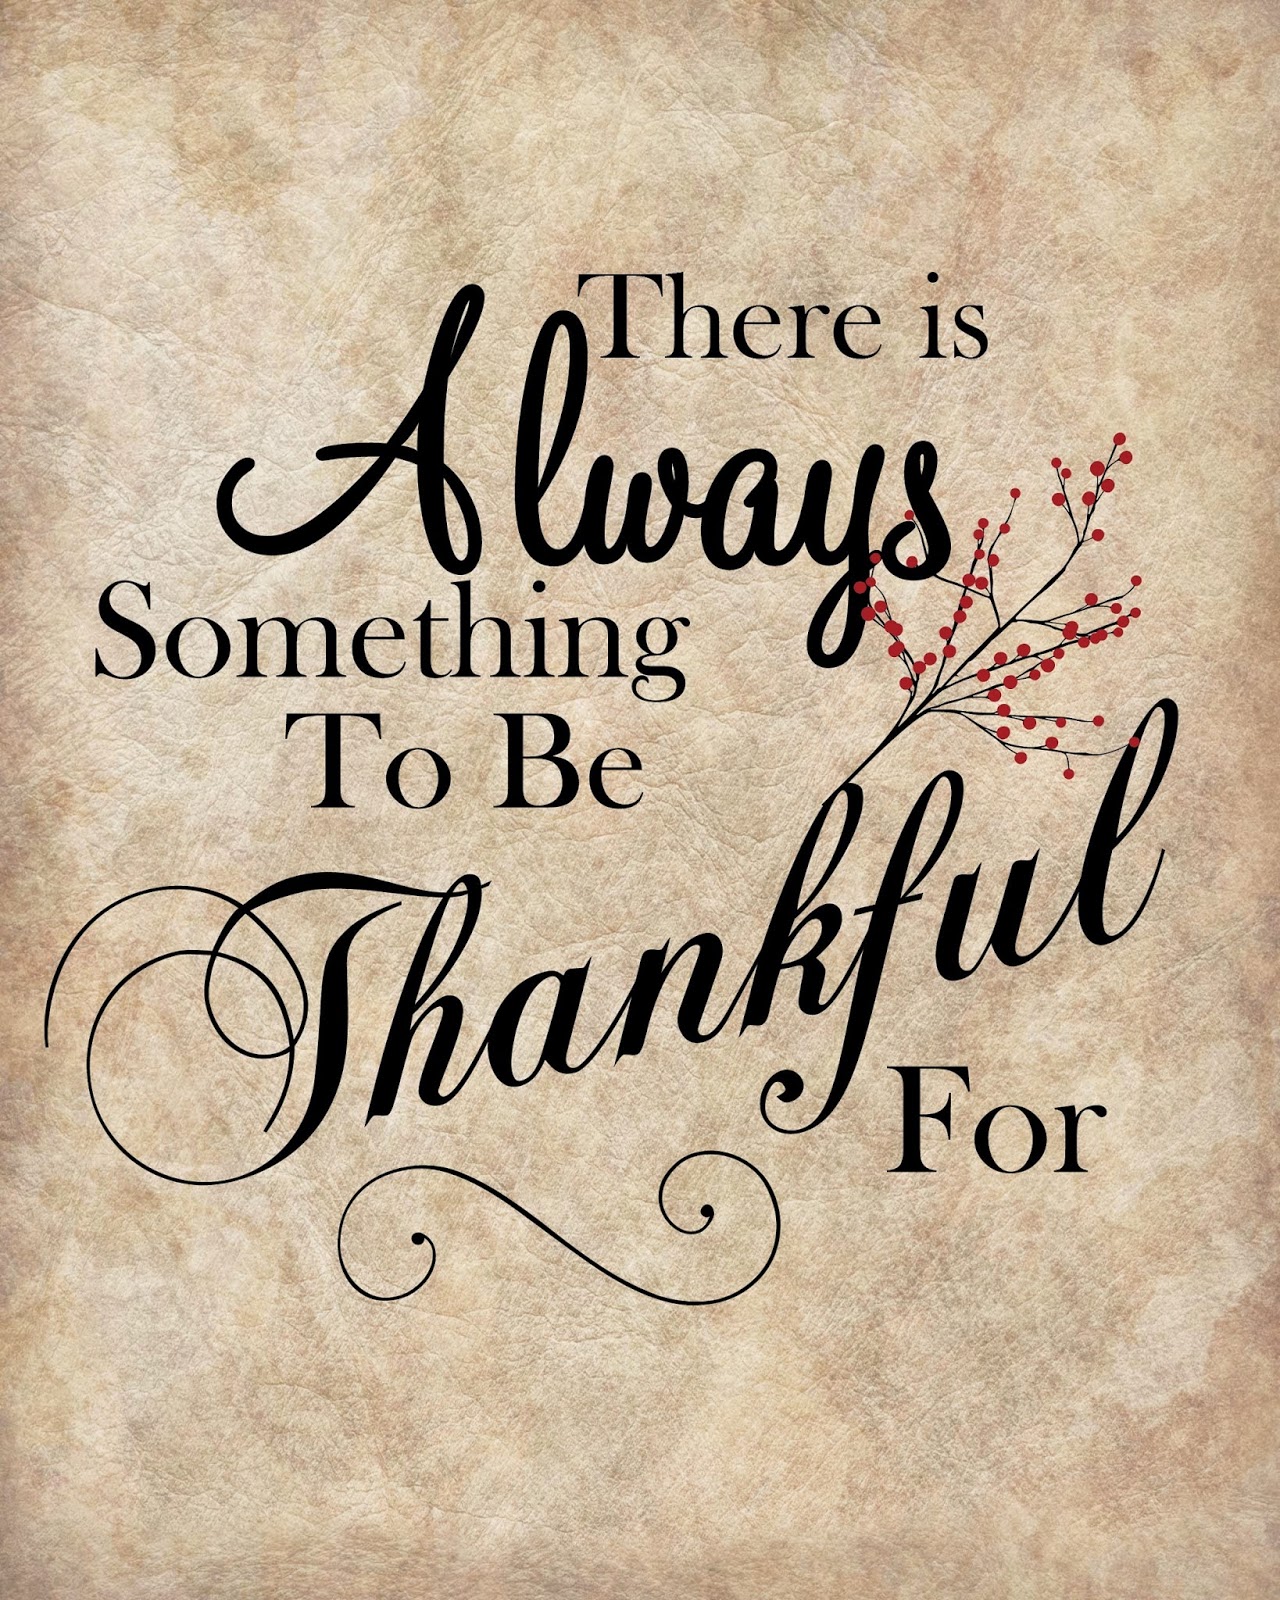 This and that Something to be Thankful For (free printable)